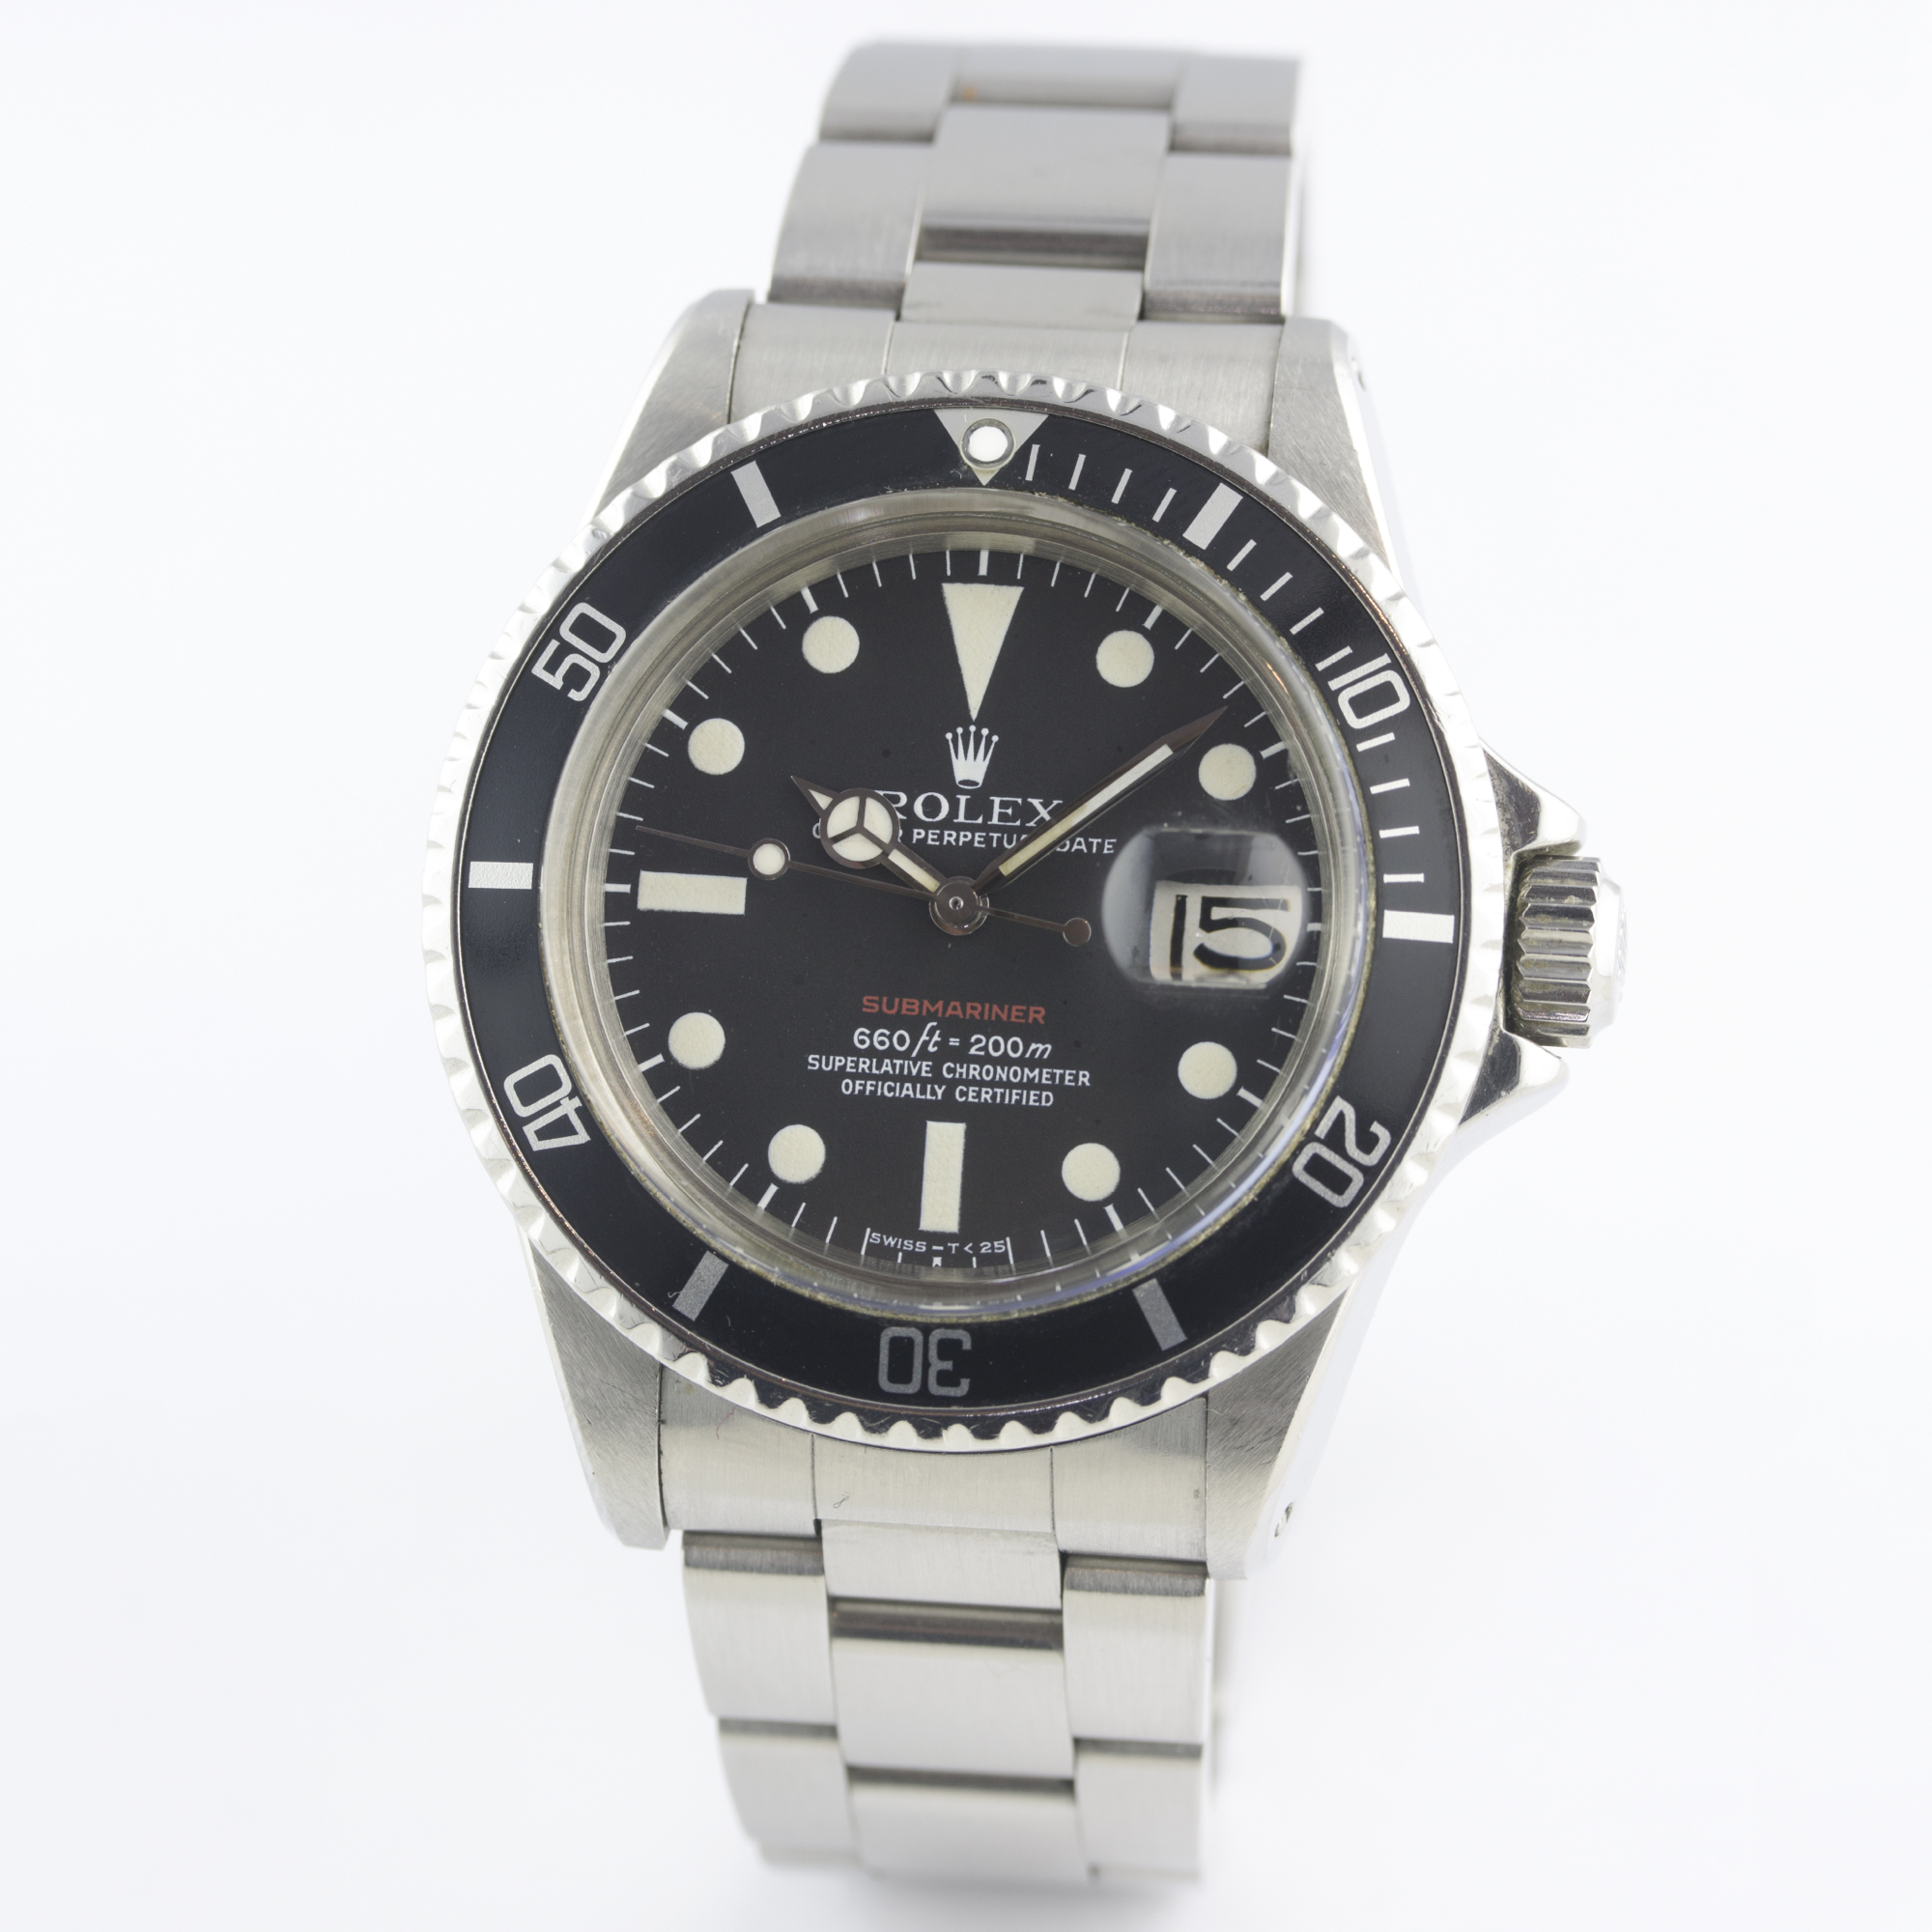 A RARE GENTLEMAN'S STAINLESS STEEL ROLEX OYSTER PERPETUAL DATE "RED WRITING" SUBMARINER BRACELET - Image 3 of 11